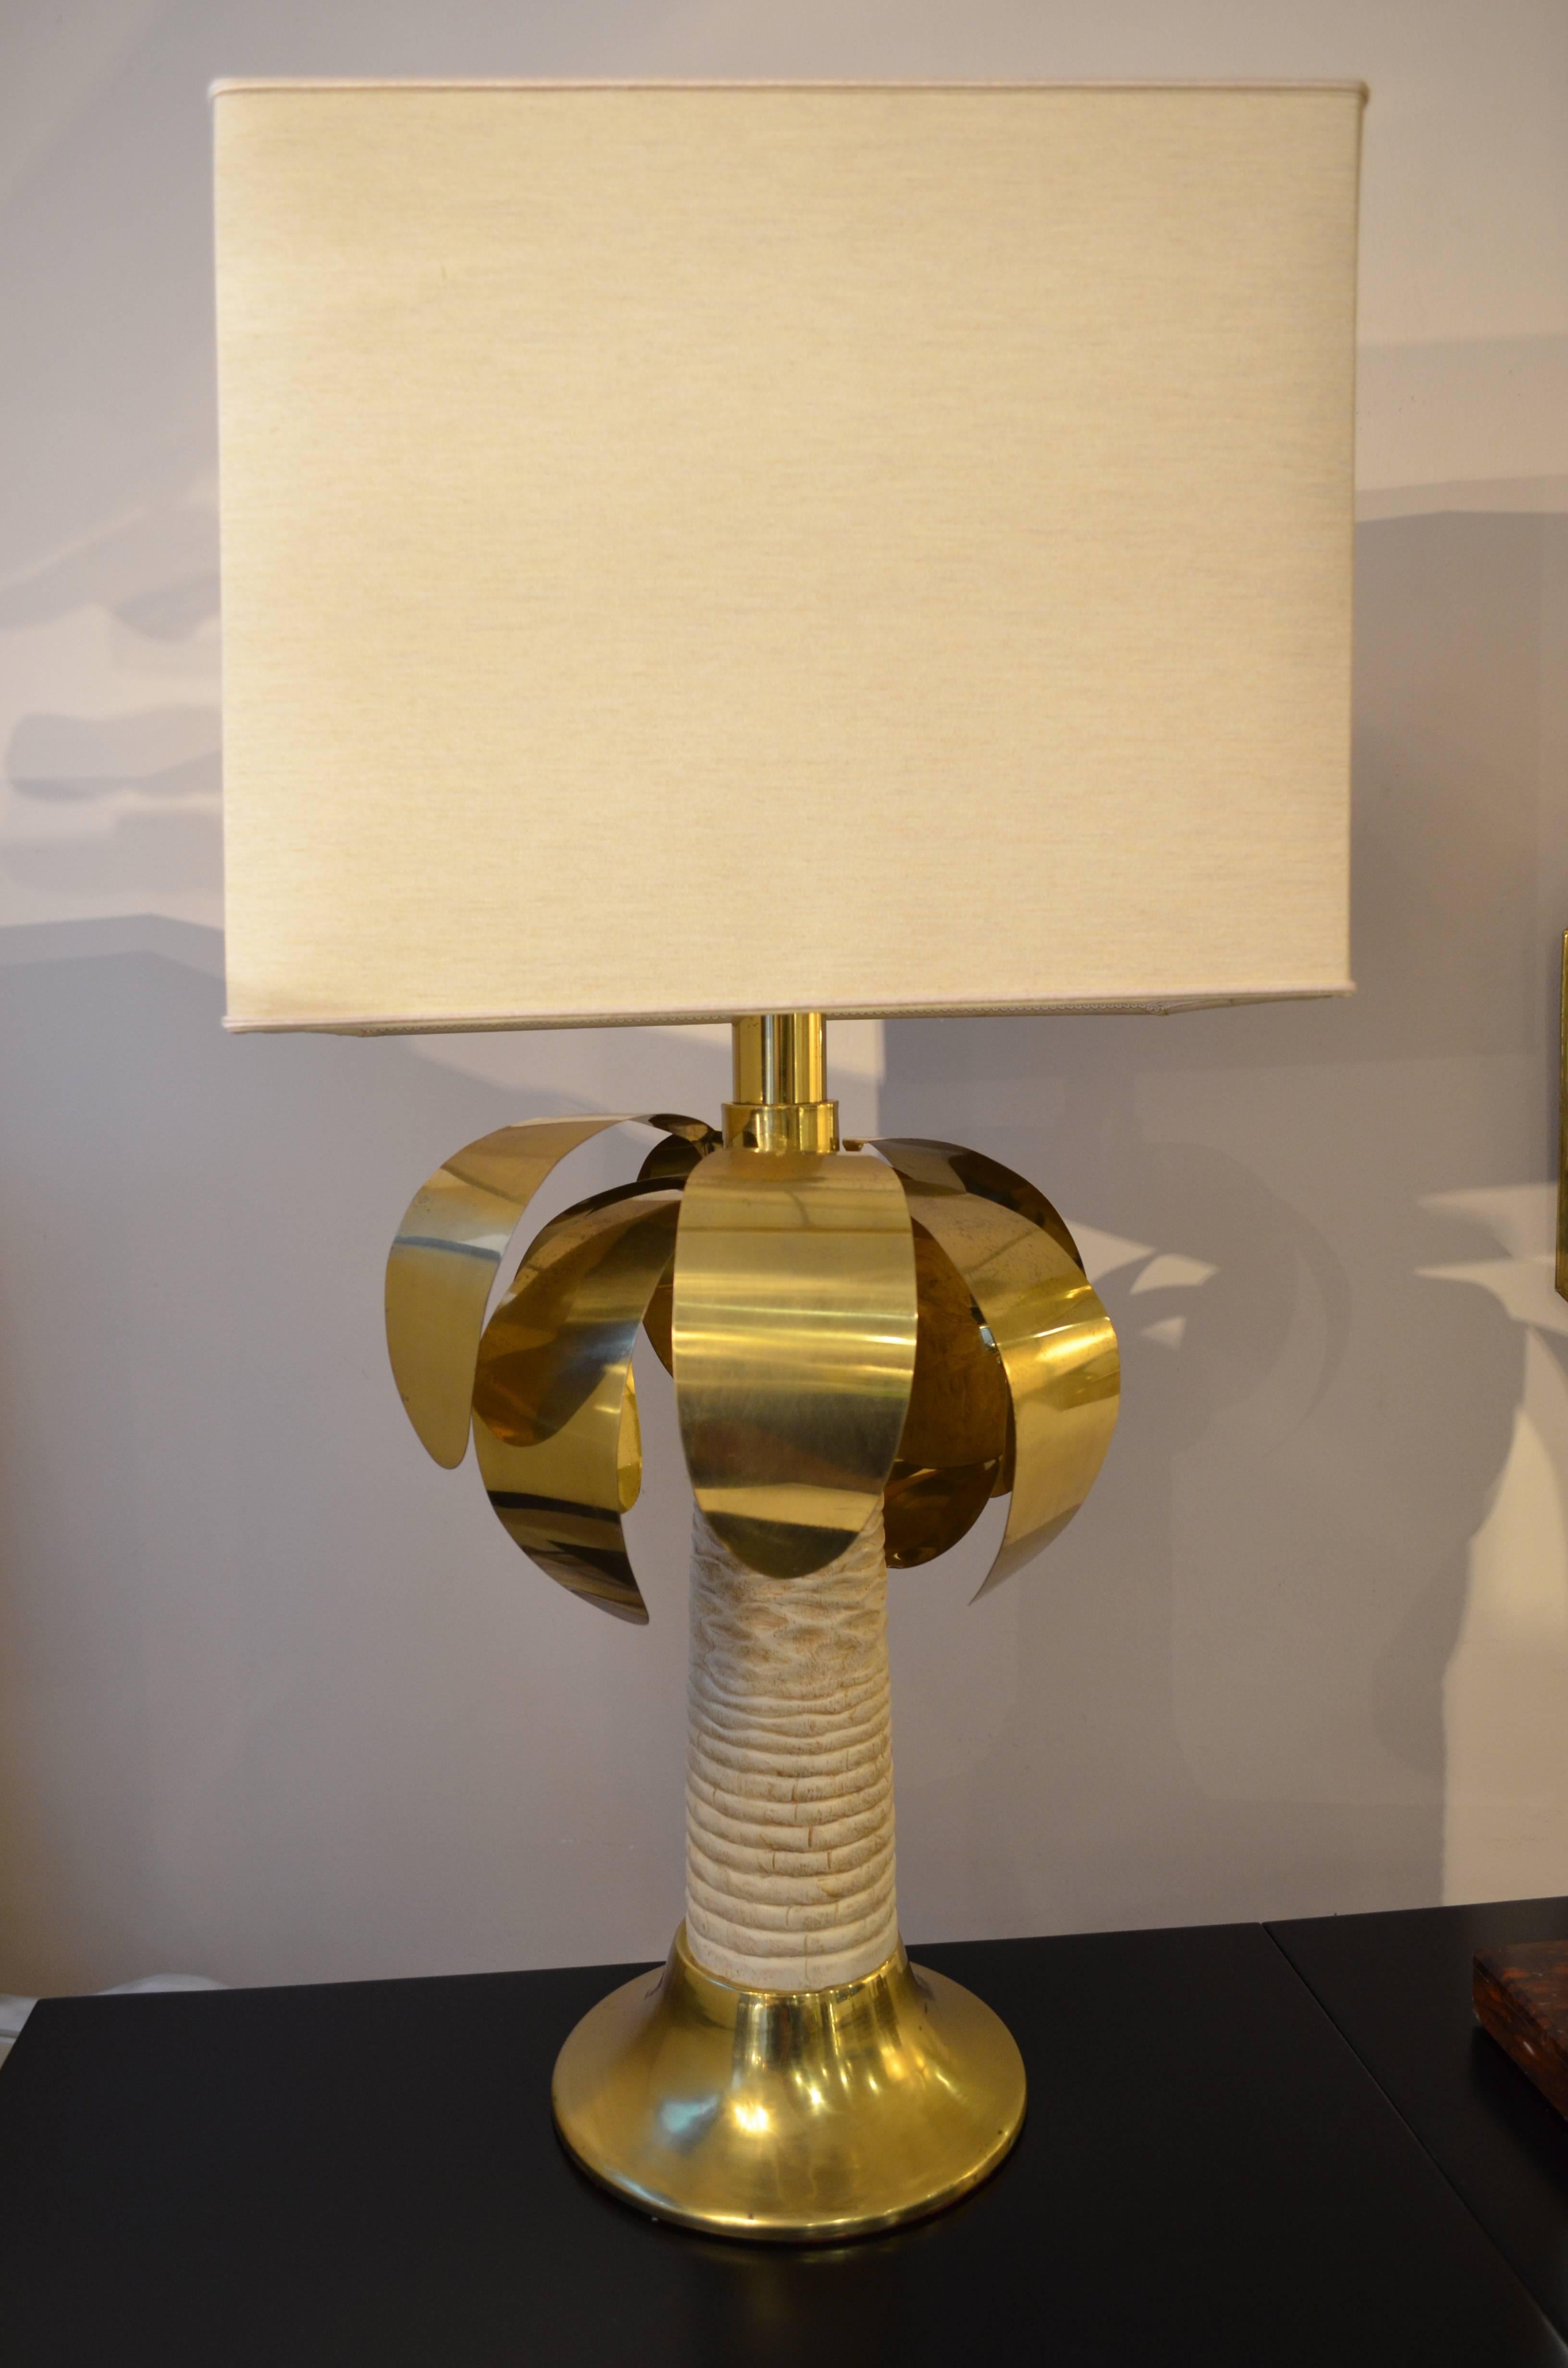 Palm three shaped gold and white table lamp, signed Spark, 1970s

Table lamp representing a palm three with brass leaves and white resin trunk. It features Spark signature on the trunk. It is from 1970s and it is perfect to give a glamour and